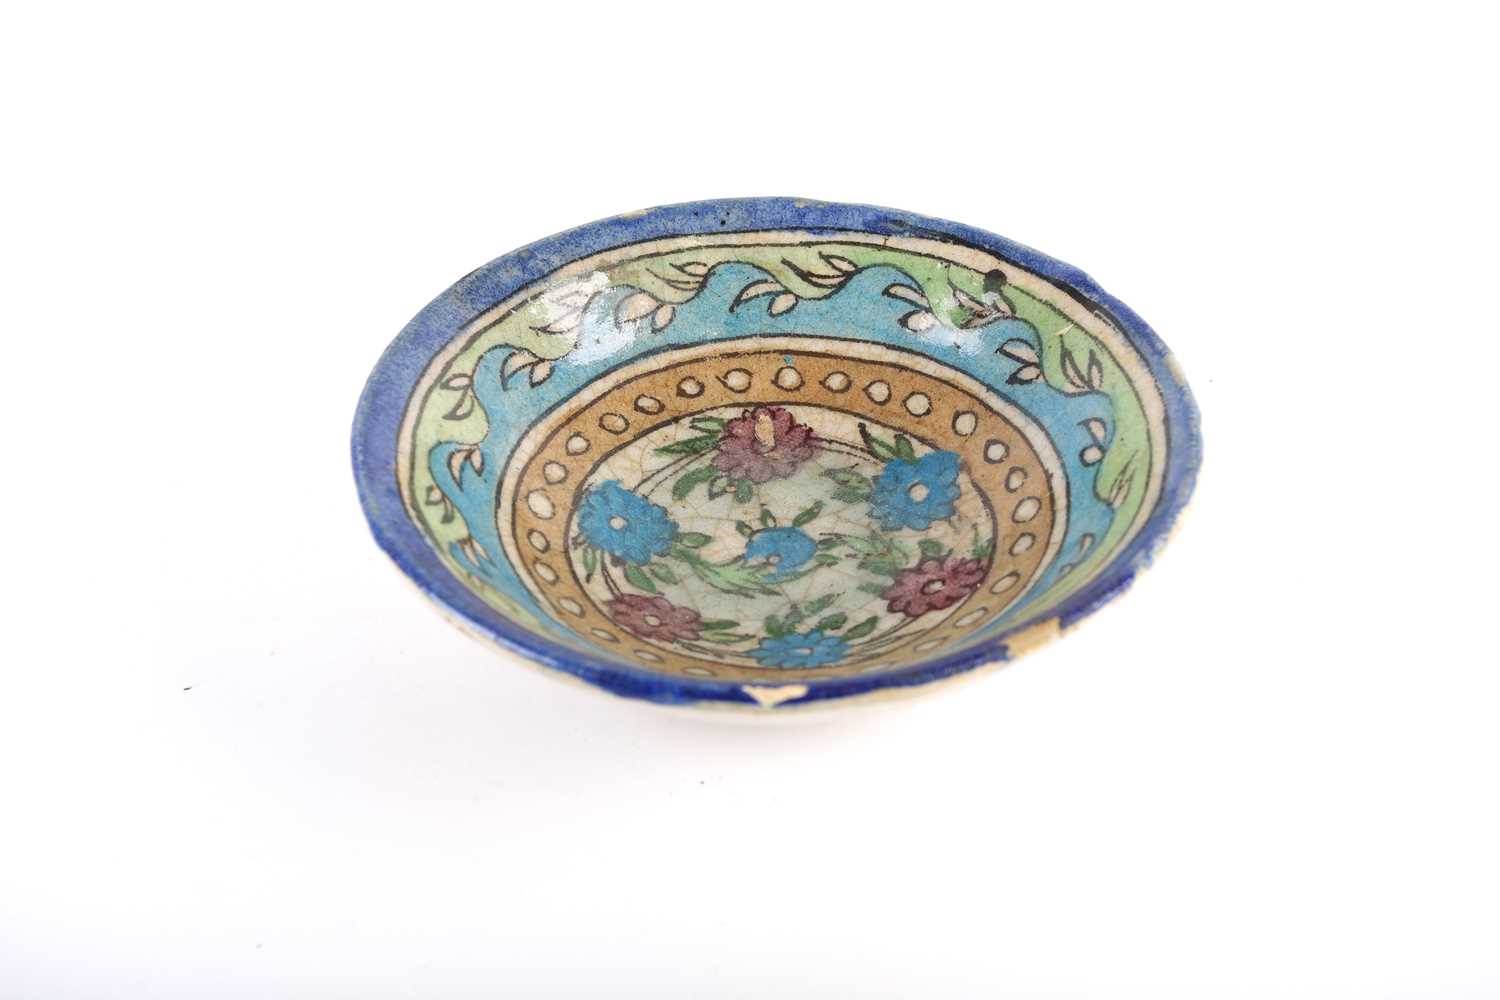 A Persian Isnik pottery bowl, Safavid/Qajar 18th century, the interior painted with flowers